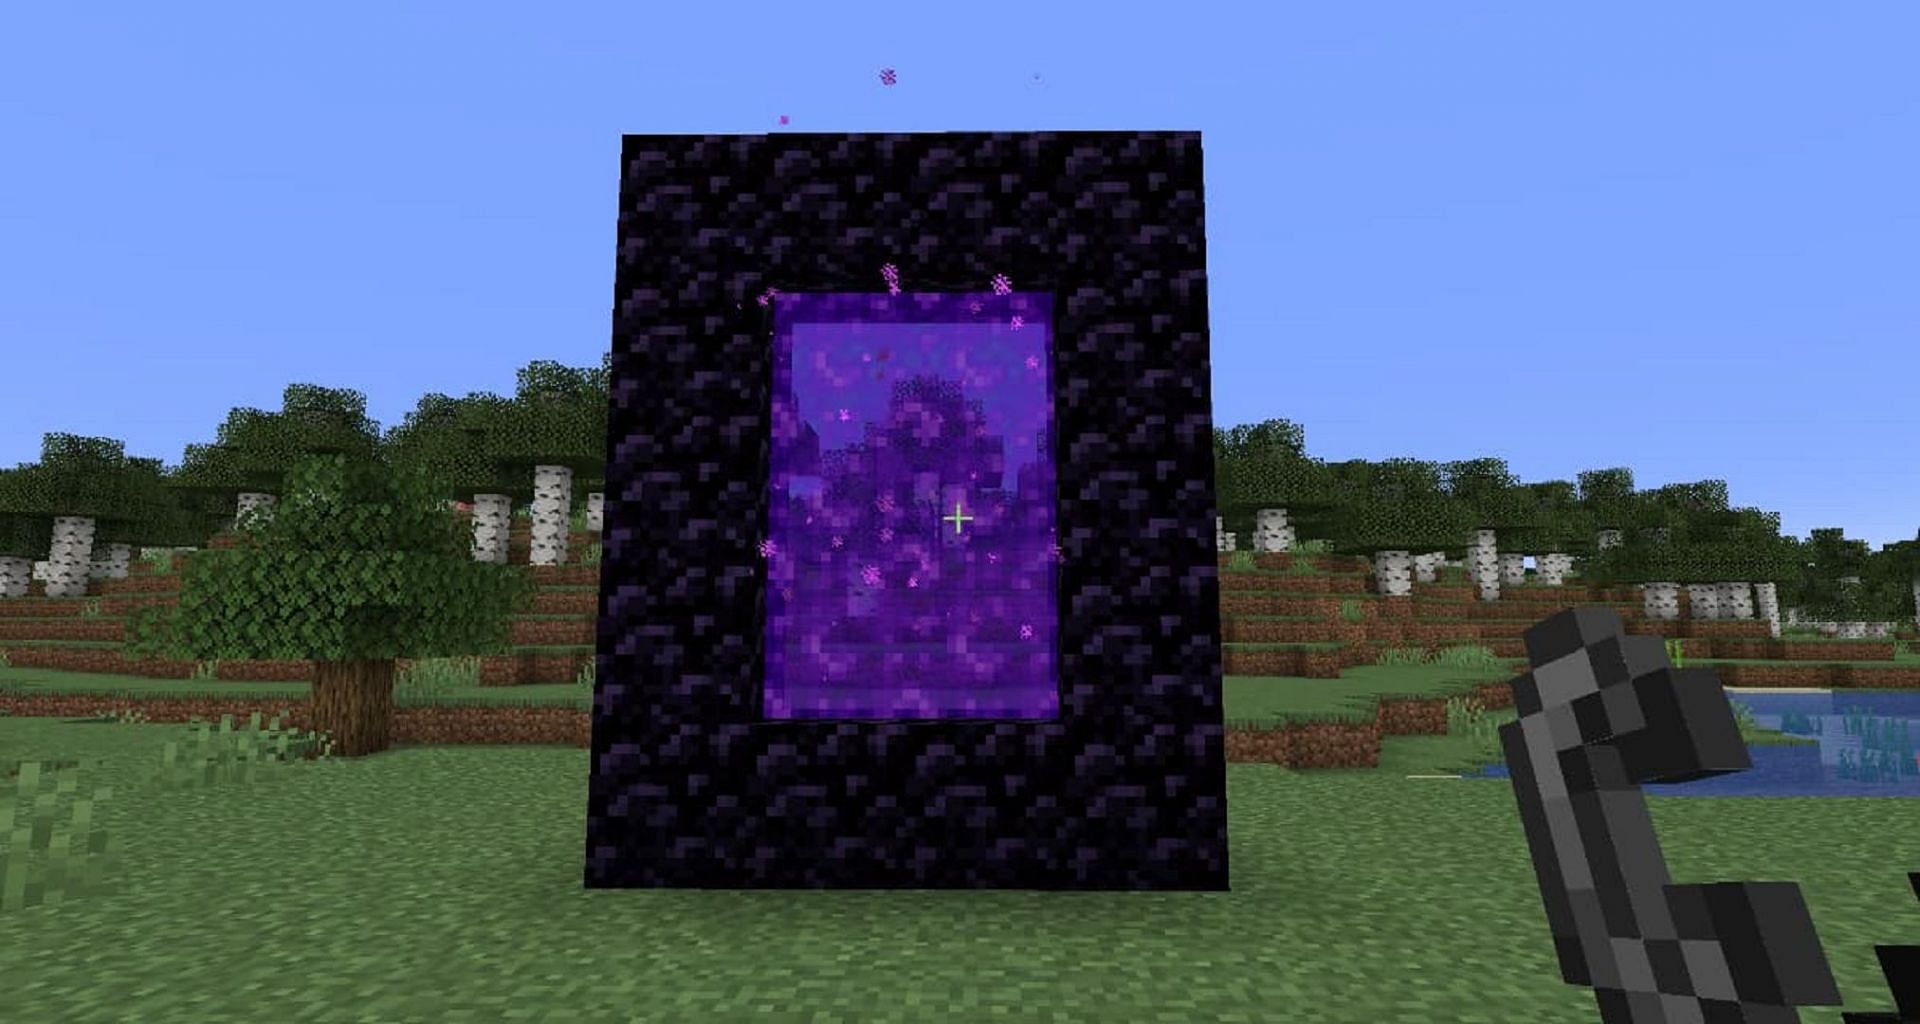 Entering the Nether can pause the flow of time in the Overworld (Image via Mojang)